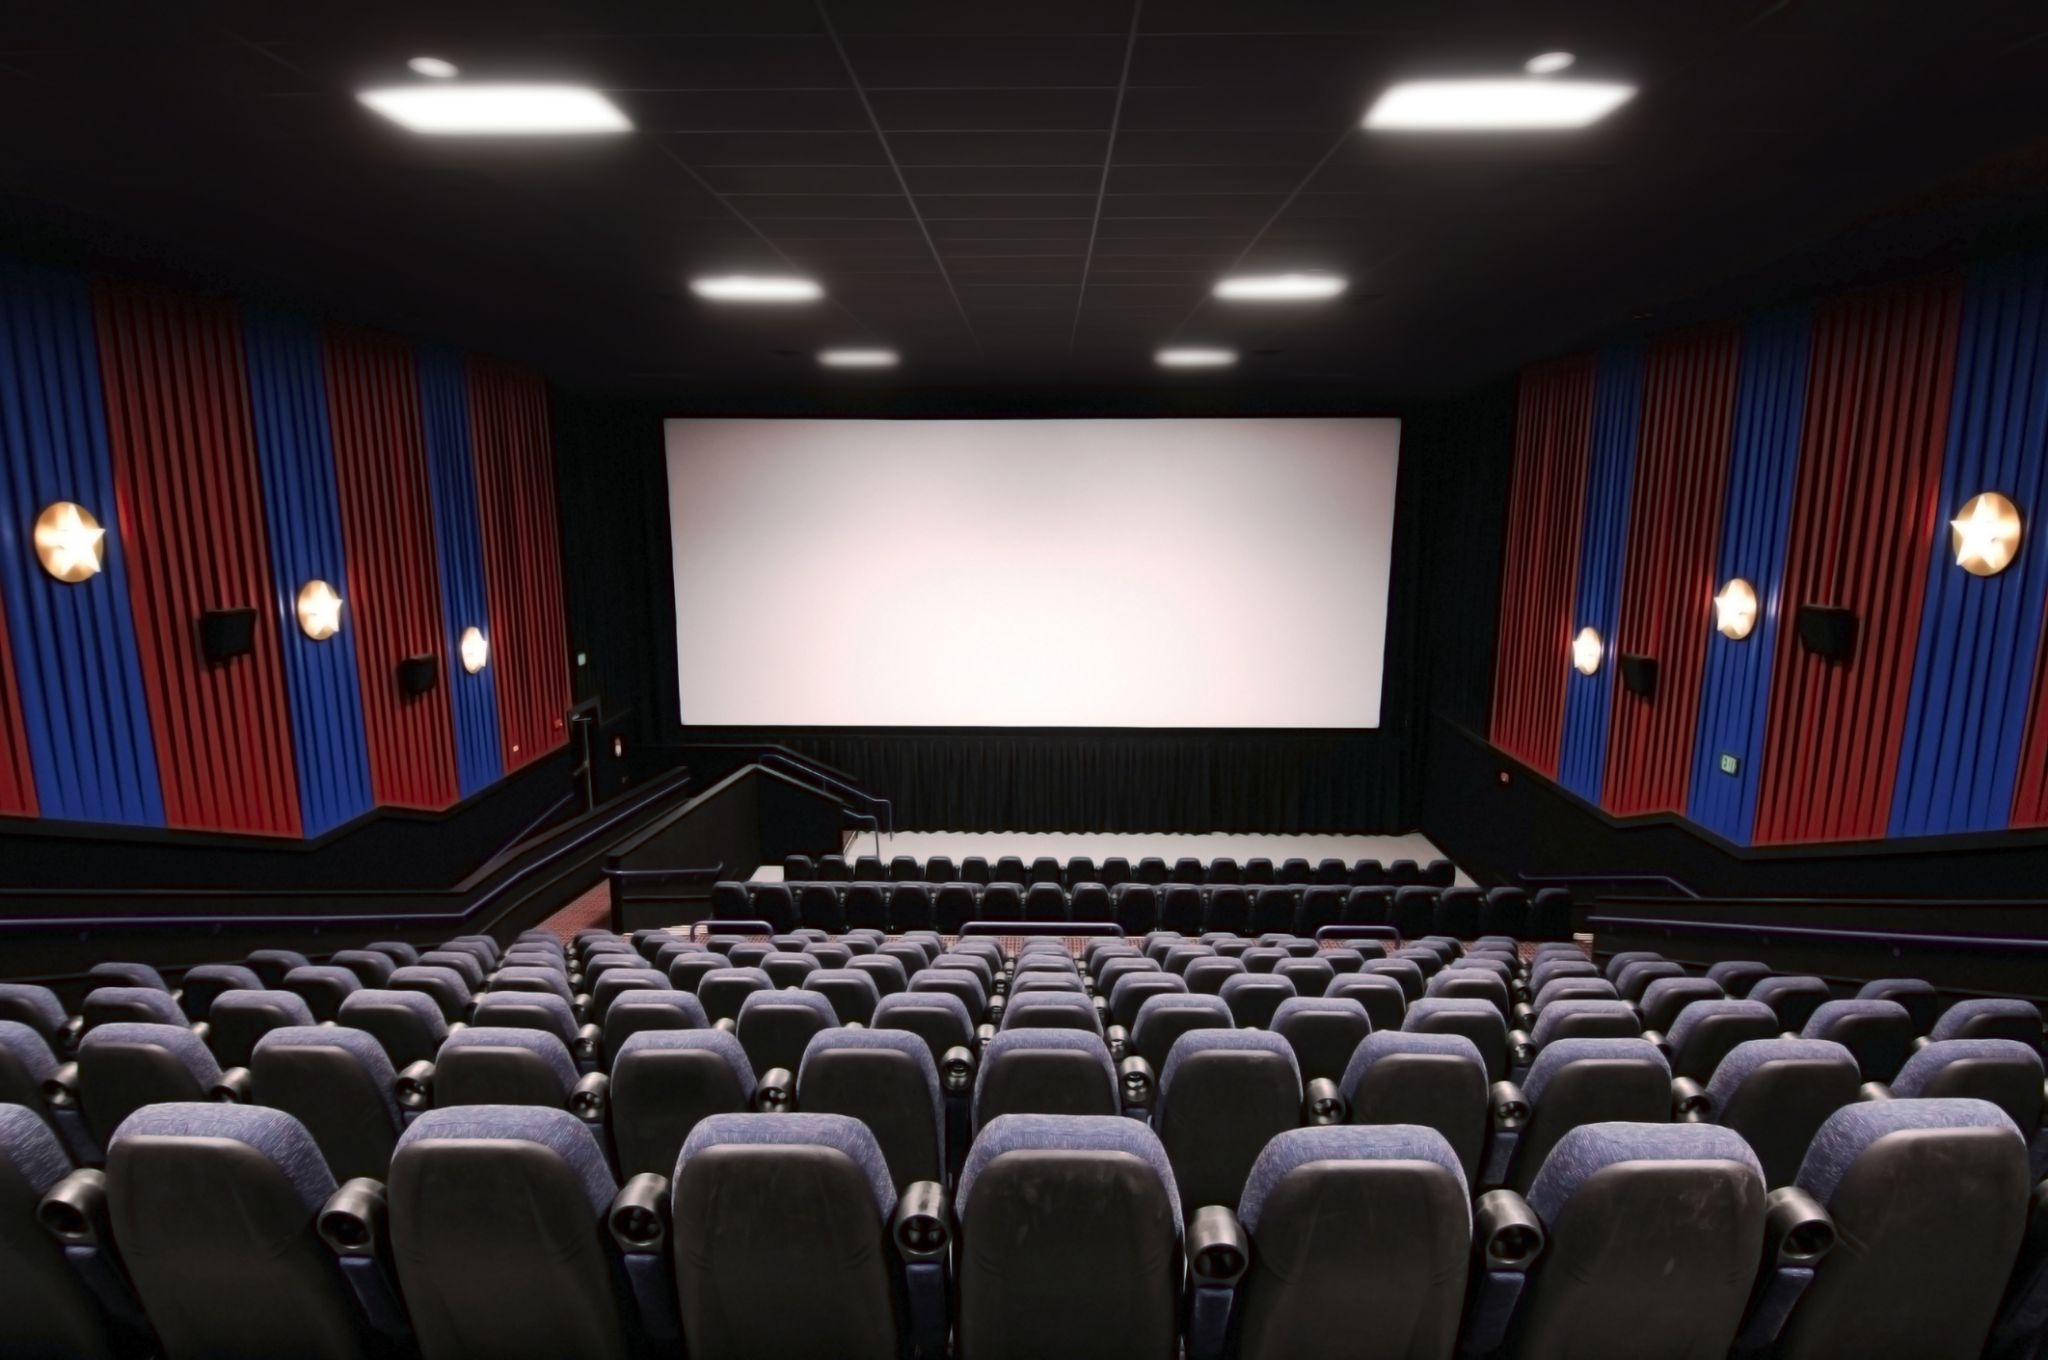 Seattle movie theaters set to open Friday — here's what will be different